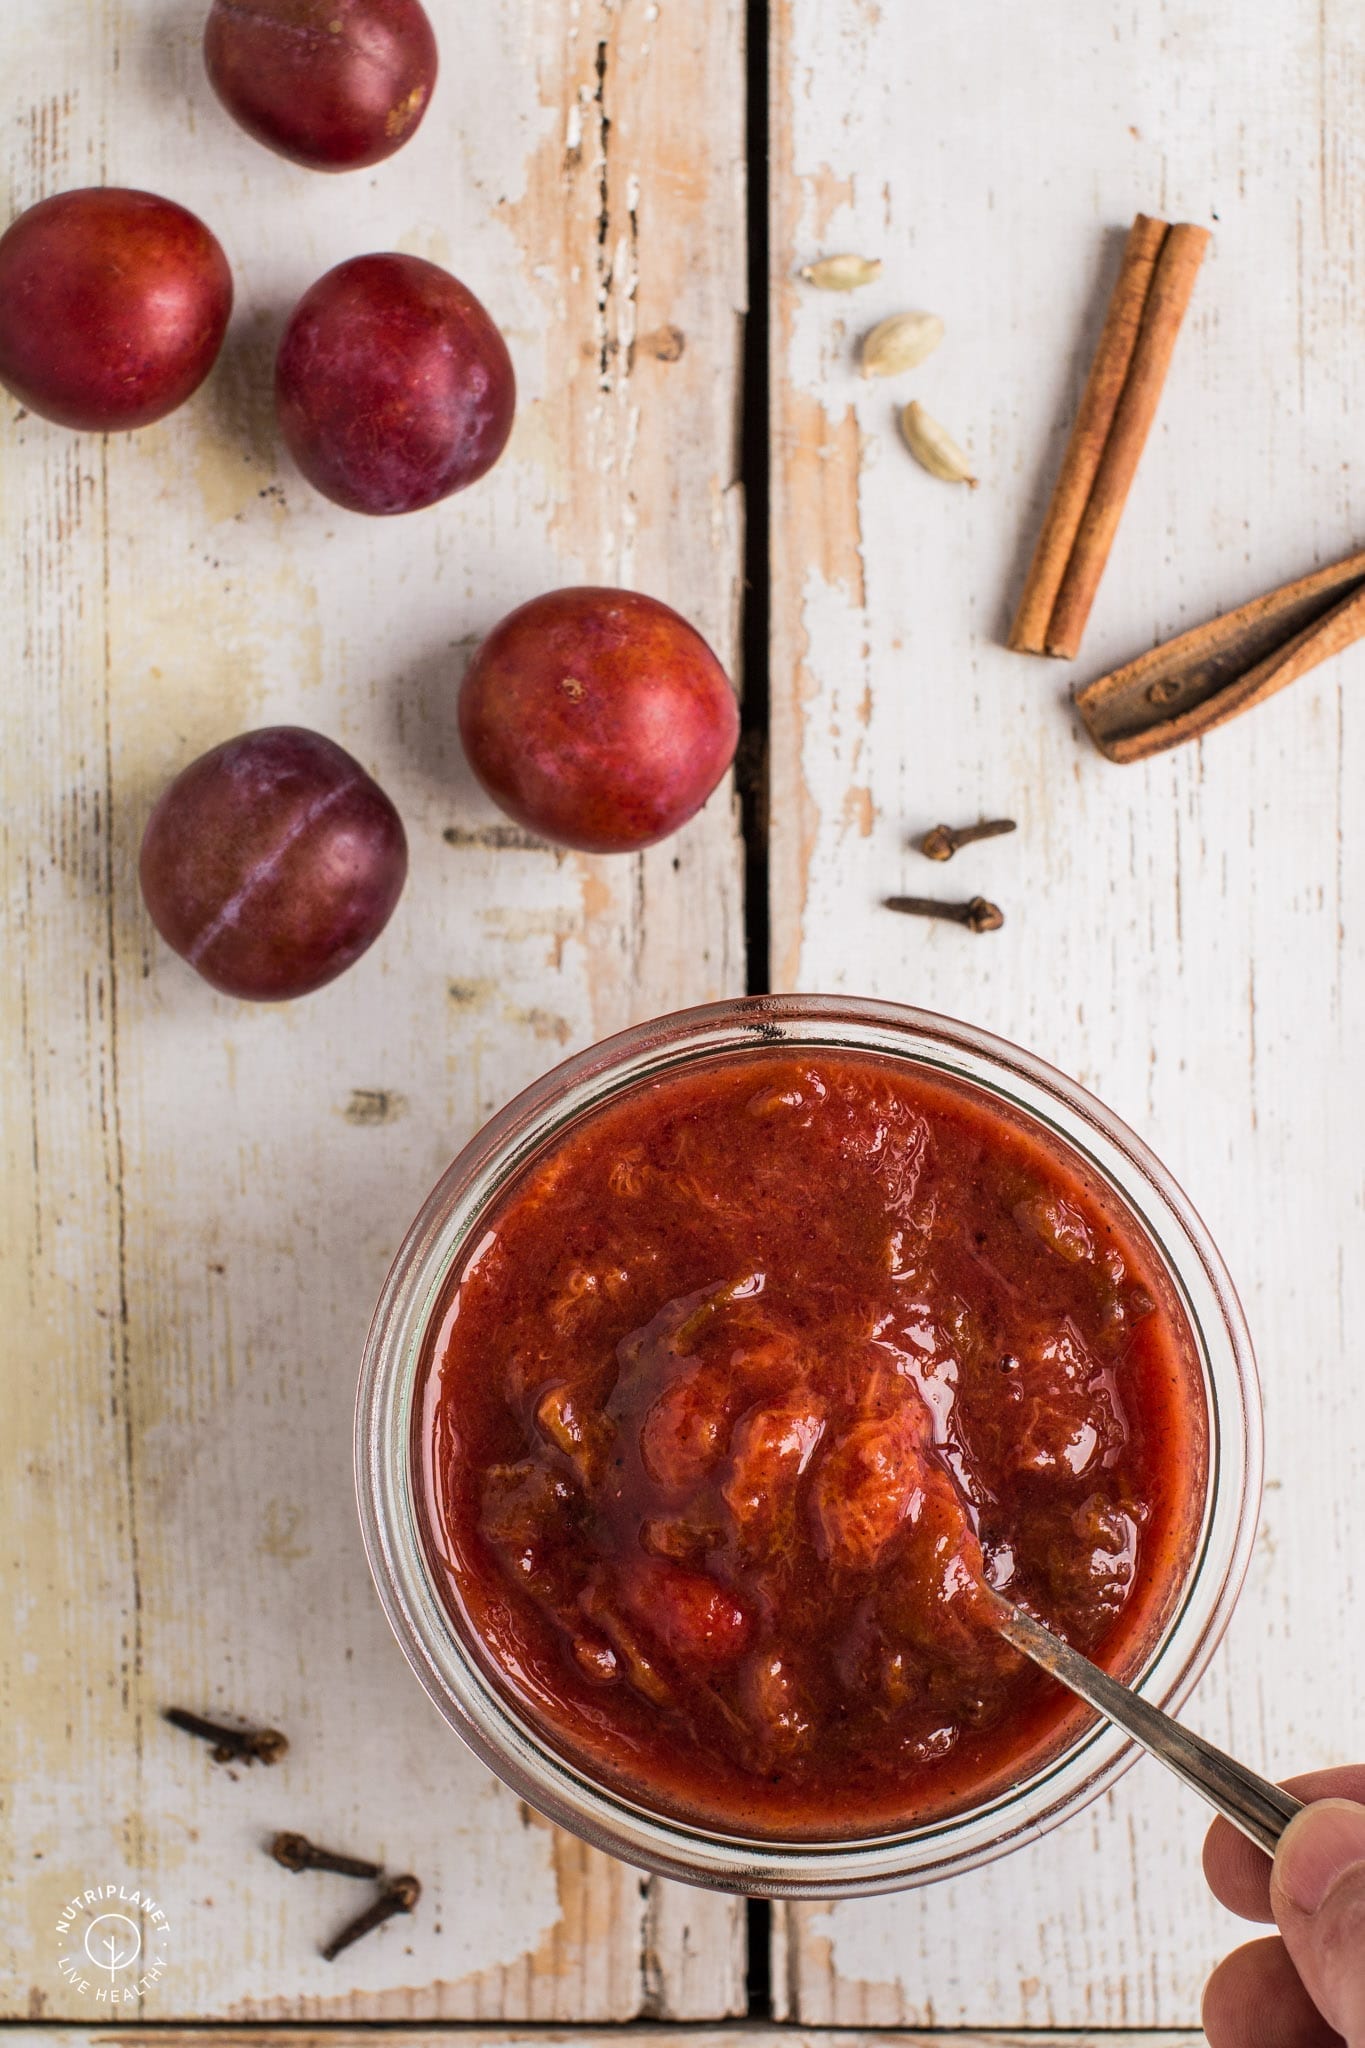 Spiced low-sugar plum jam for canning that will make a perfect spread for toast or topping for porridges, pancakes and waffles.